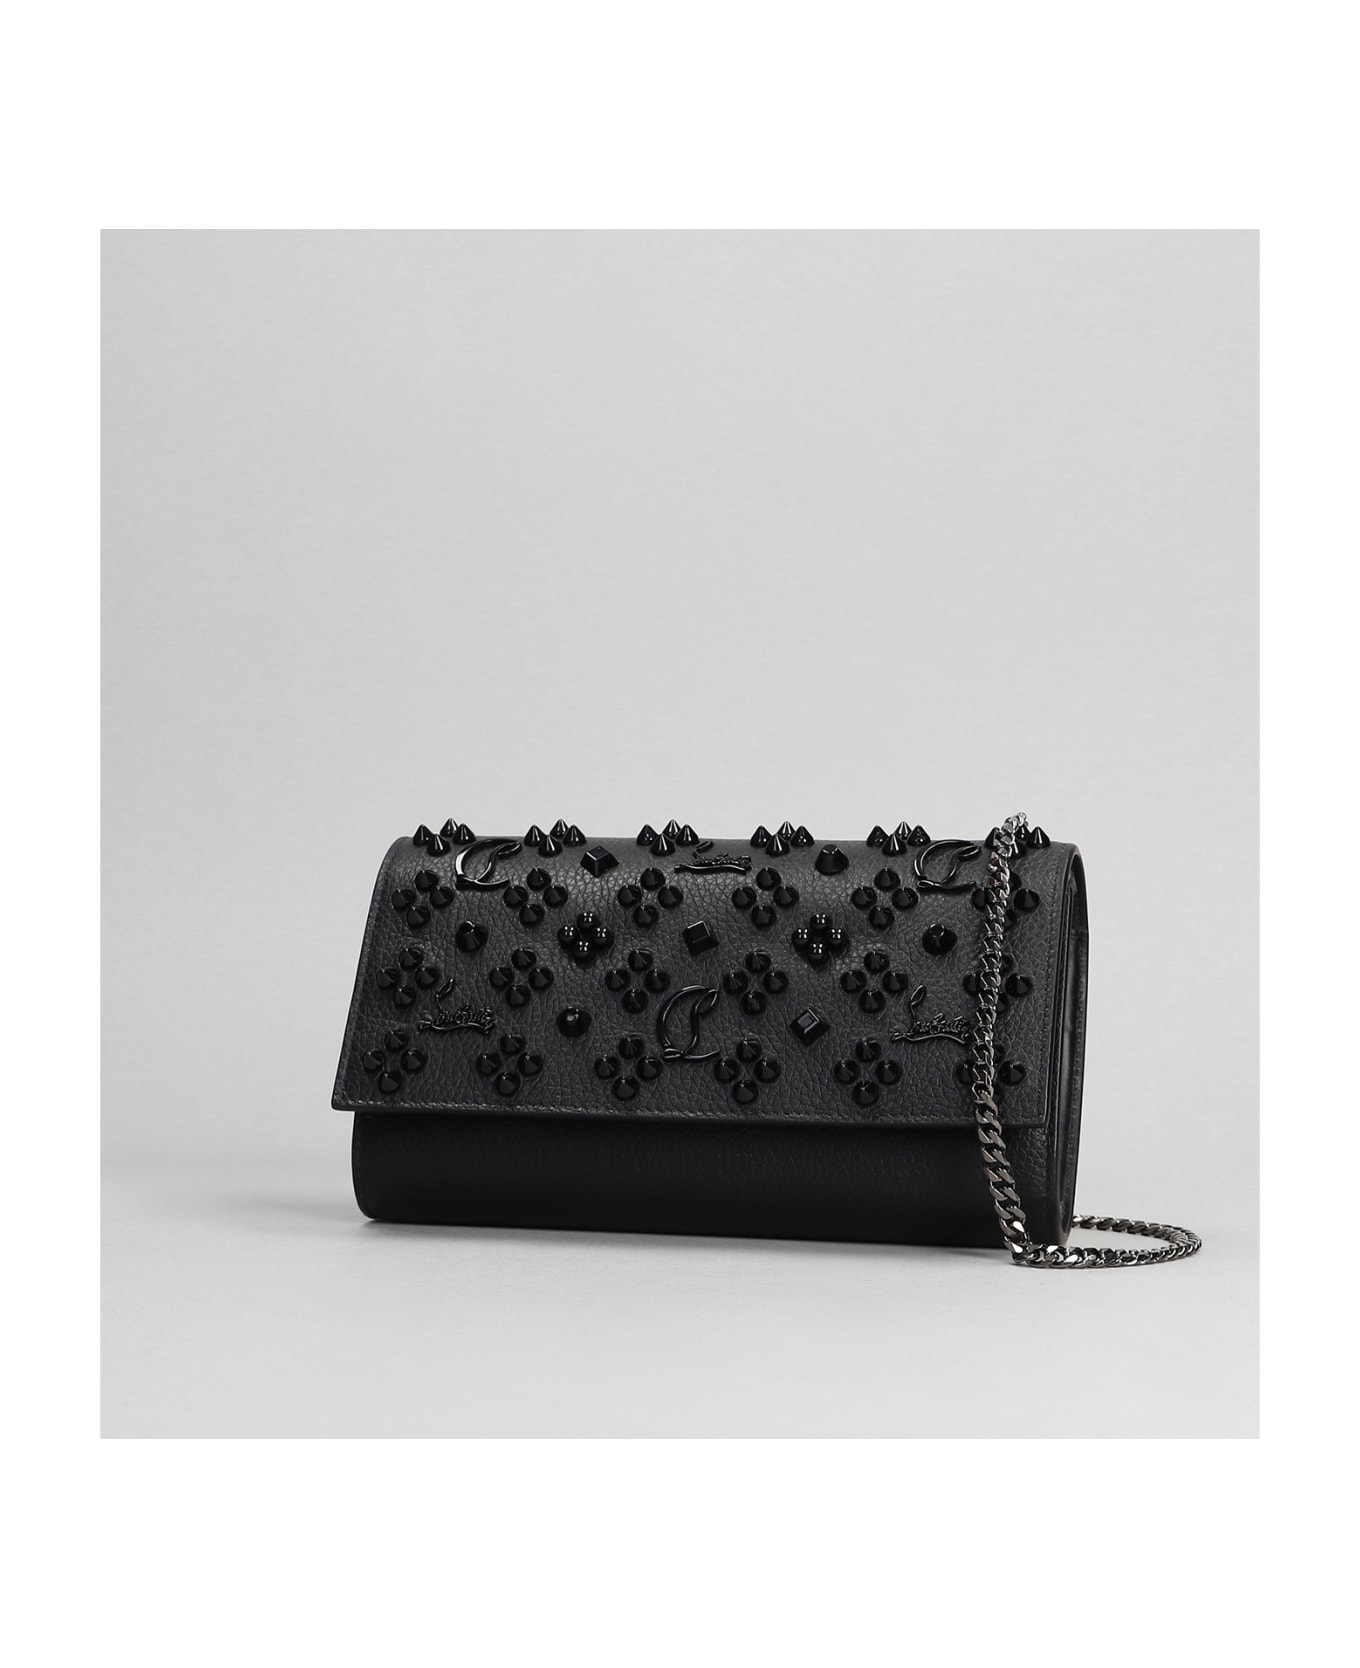 Christian Louboutin Paloma Clutch In Black Leather - Black ショルダーバッグ